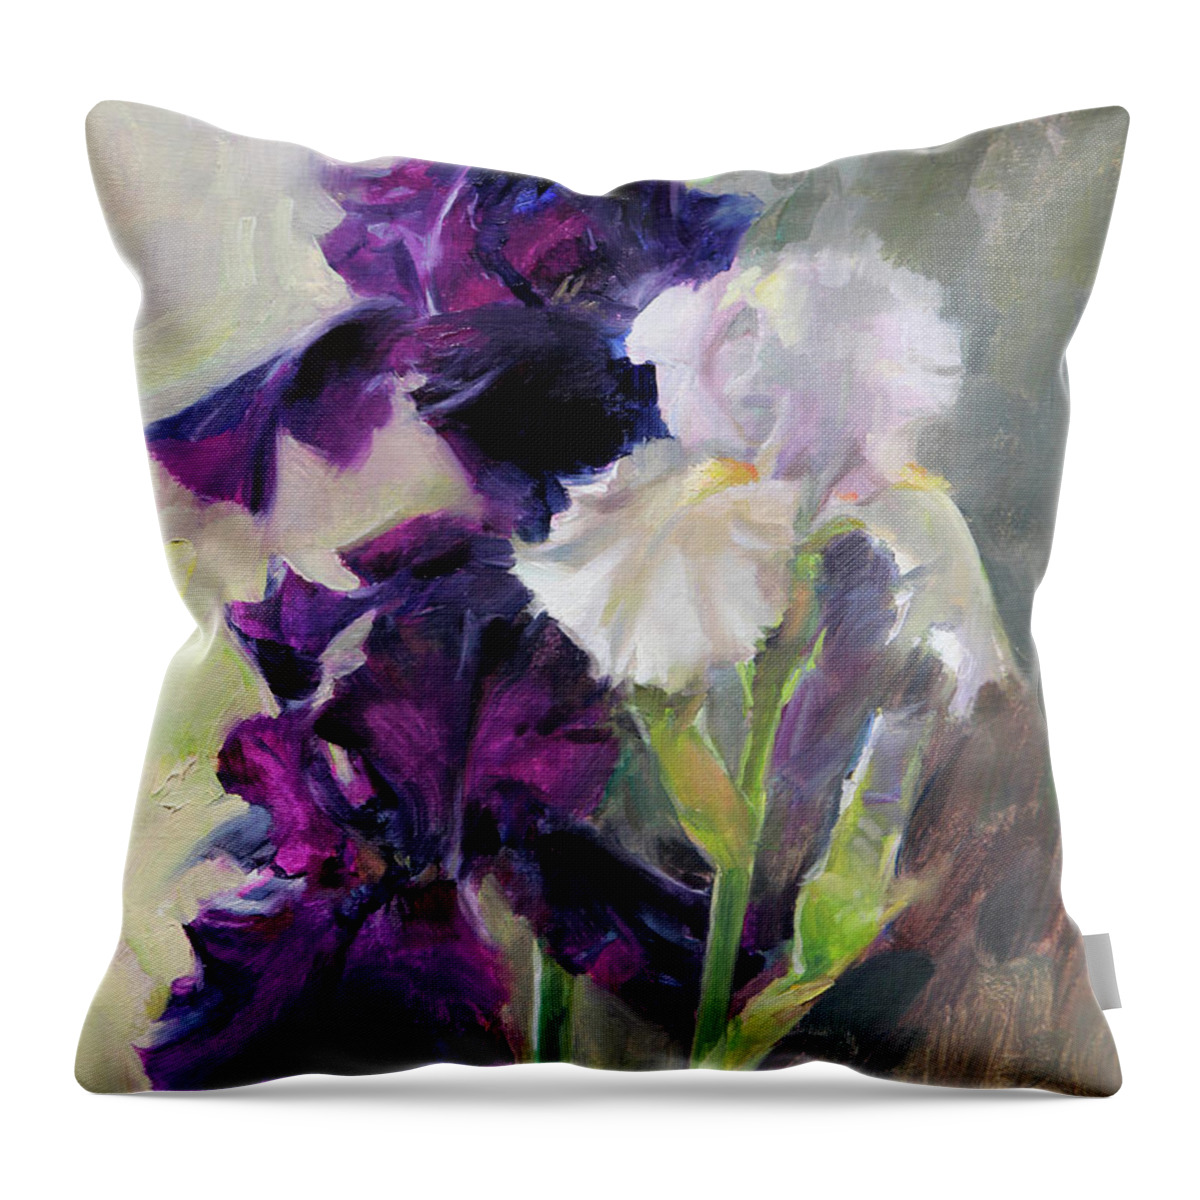 Iris Throw Pillow featuring the painting Bearded Irises by Anna Rose Bain